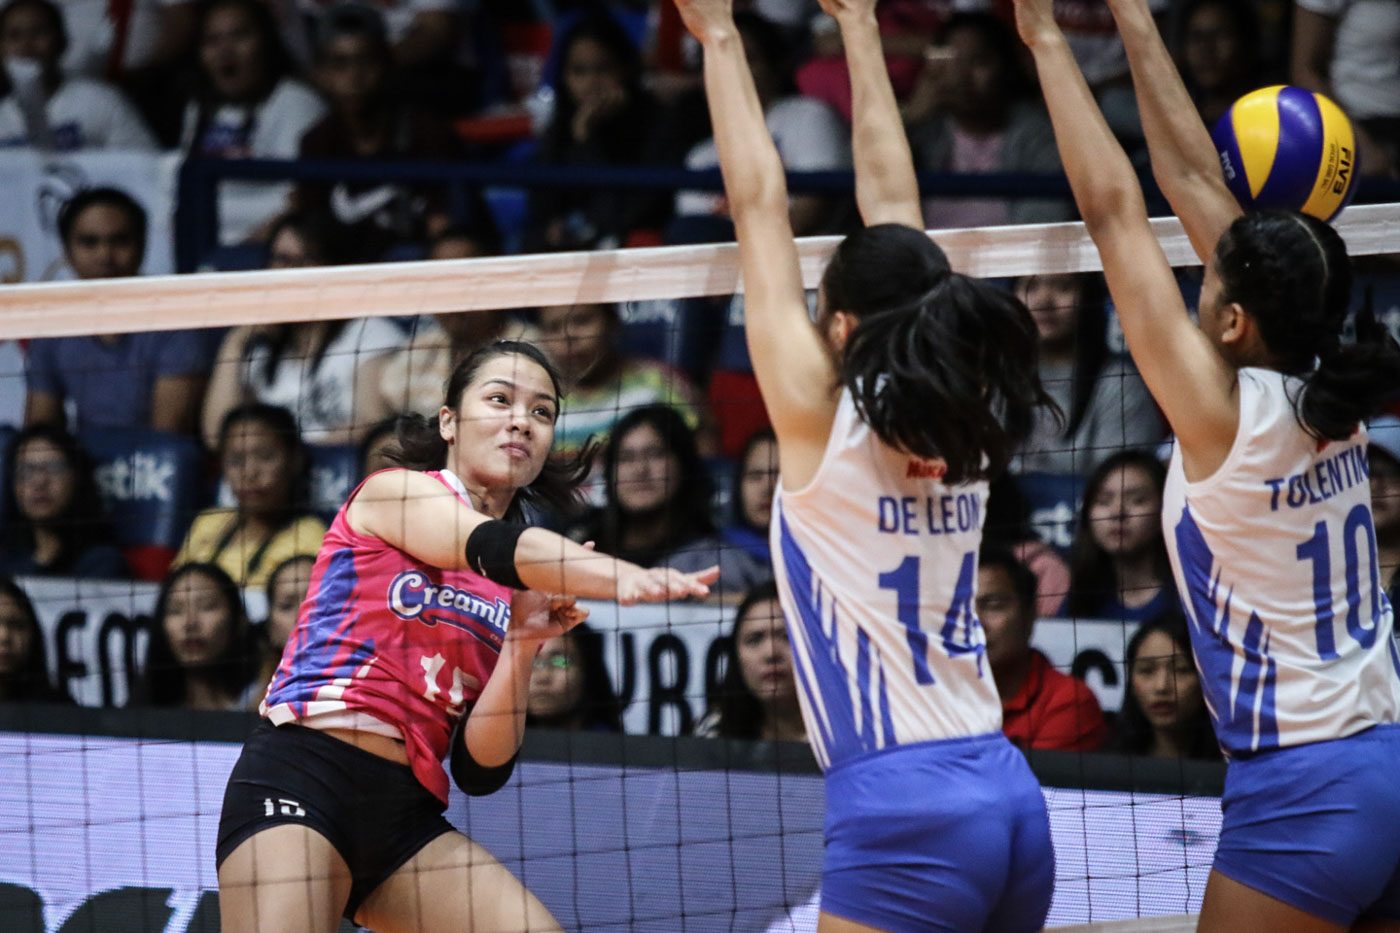 Creamline sweeps Ateneo, moves within win of PVL crown